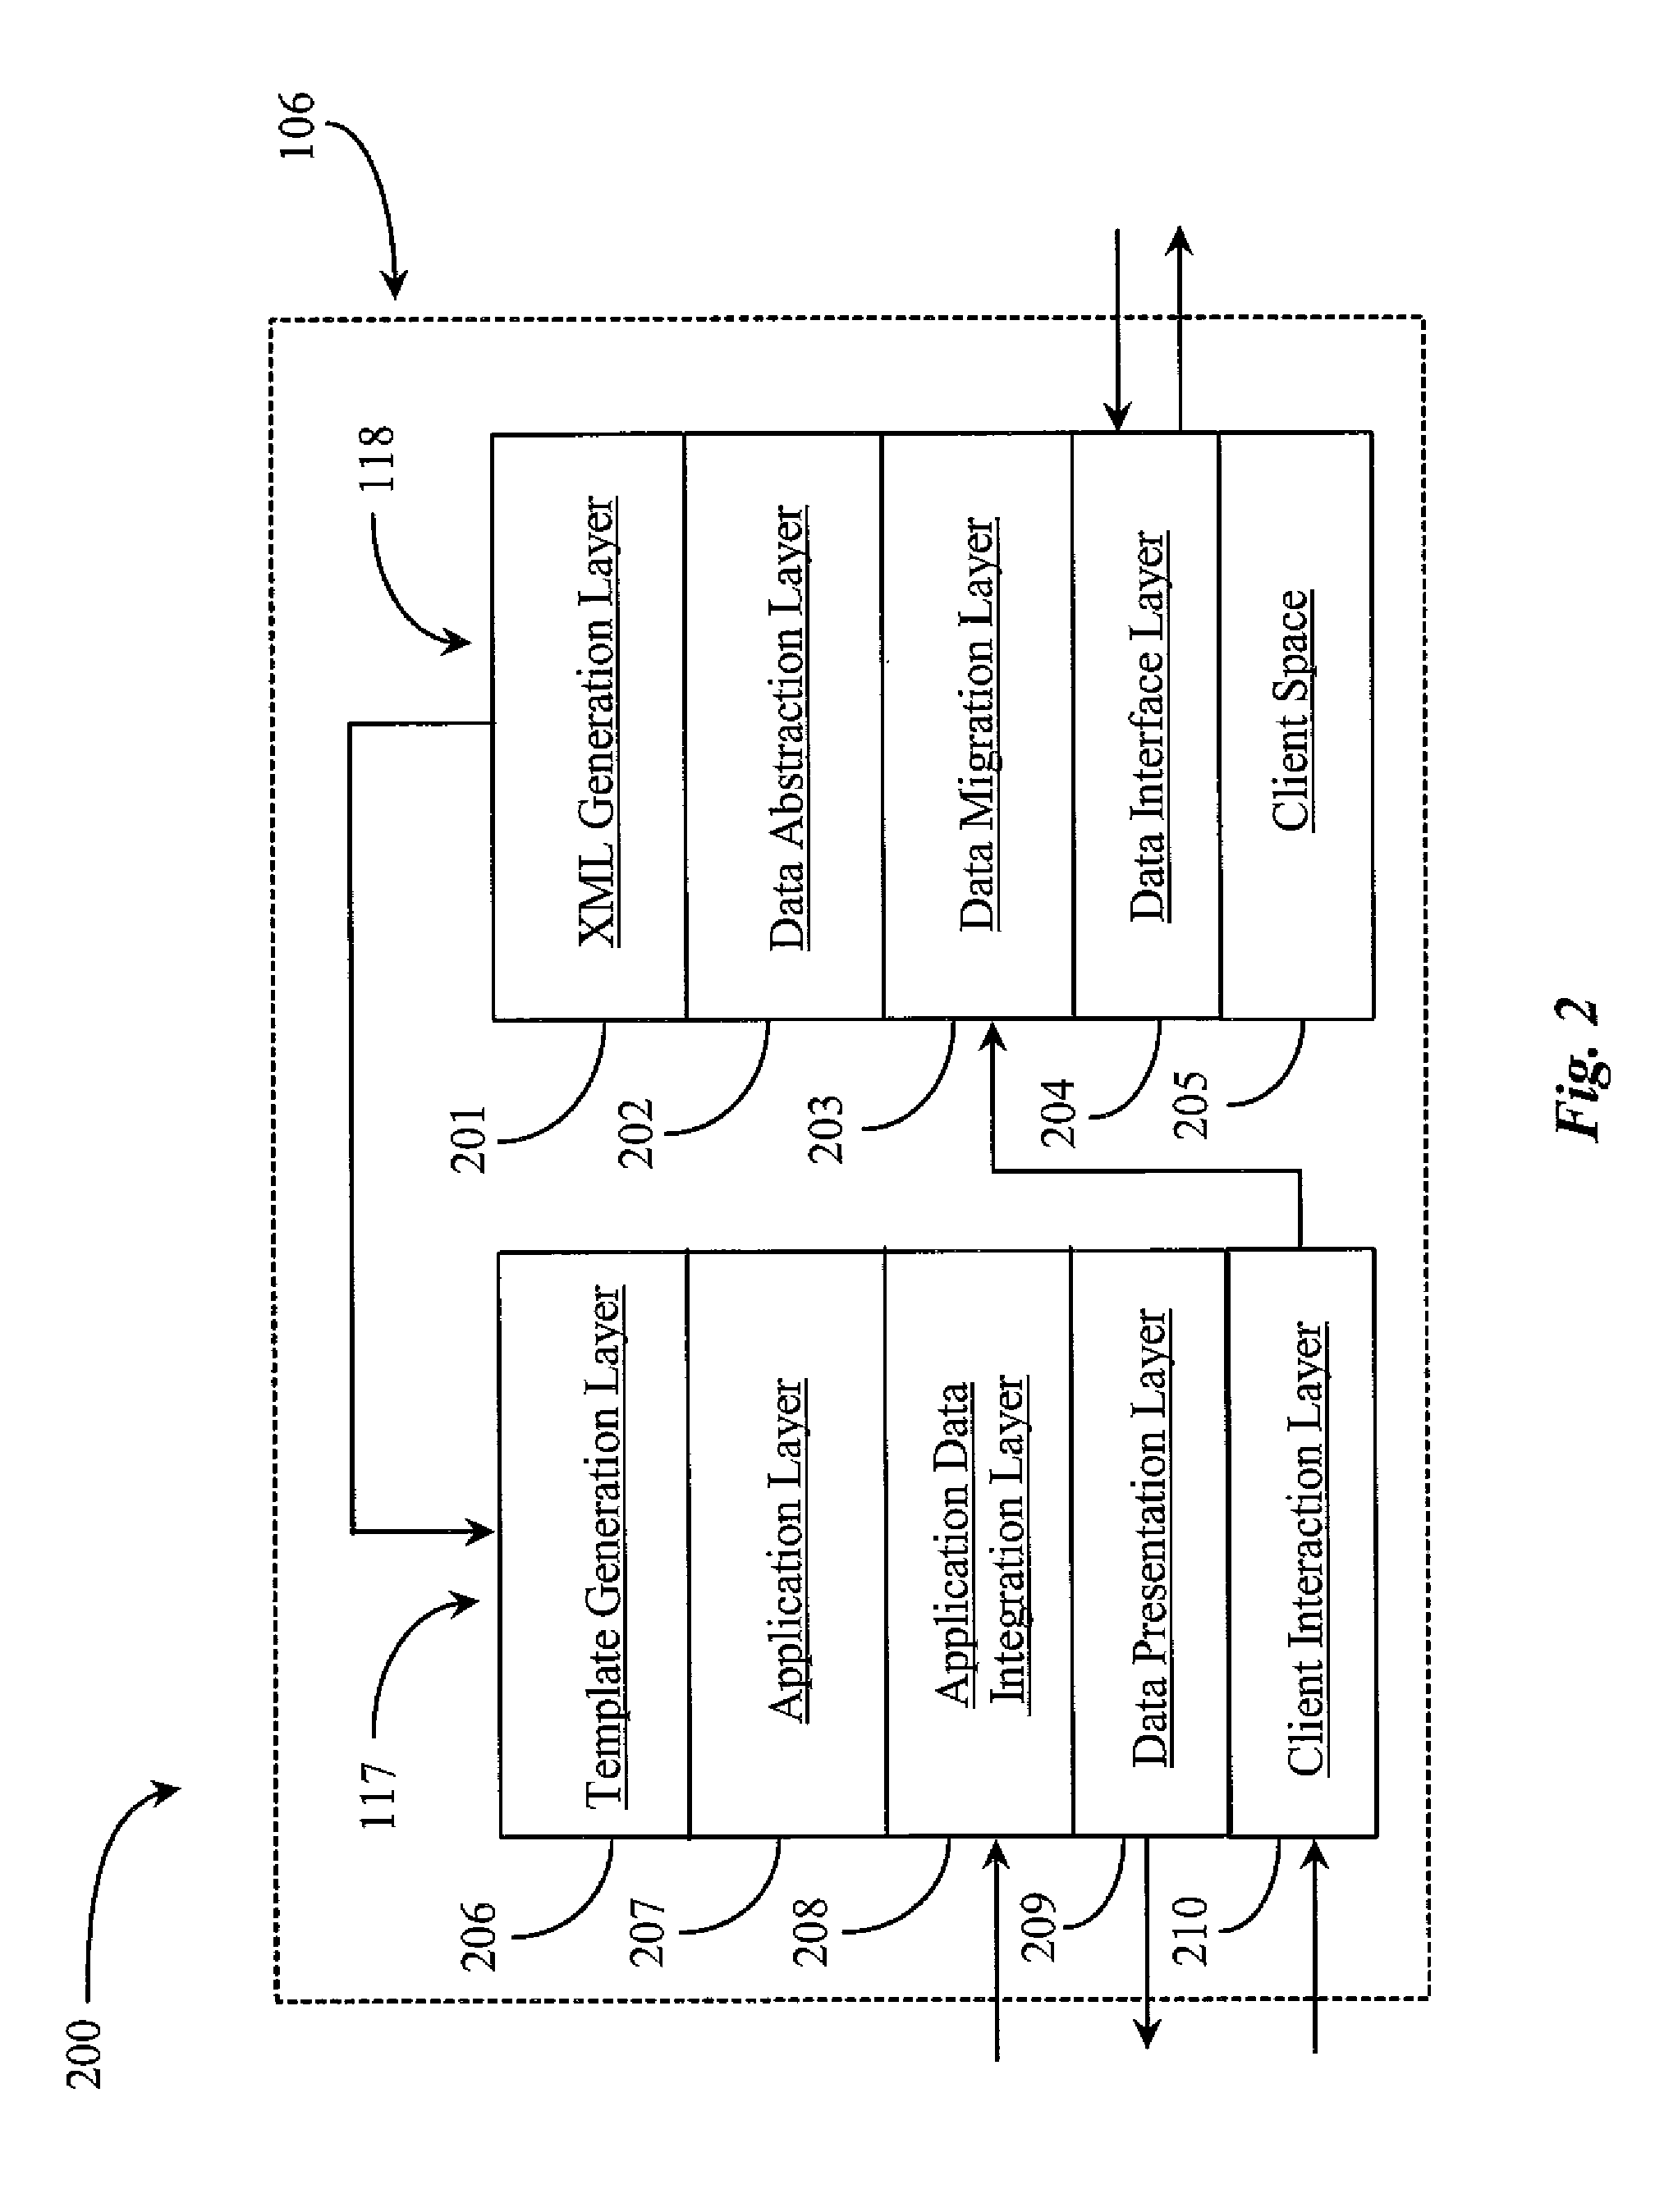 Method and System for Providing Access to Electronic Learning and Social Interaction with in a Single Application